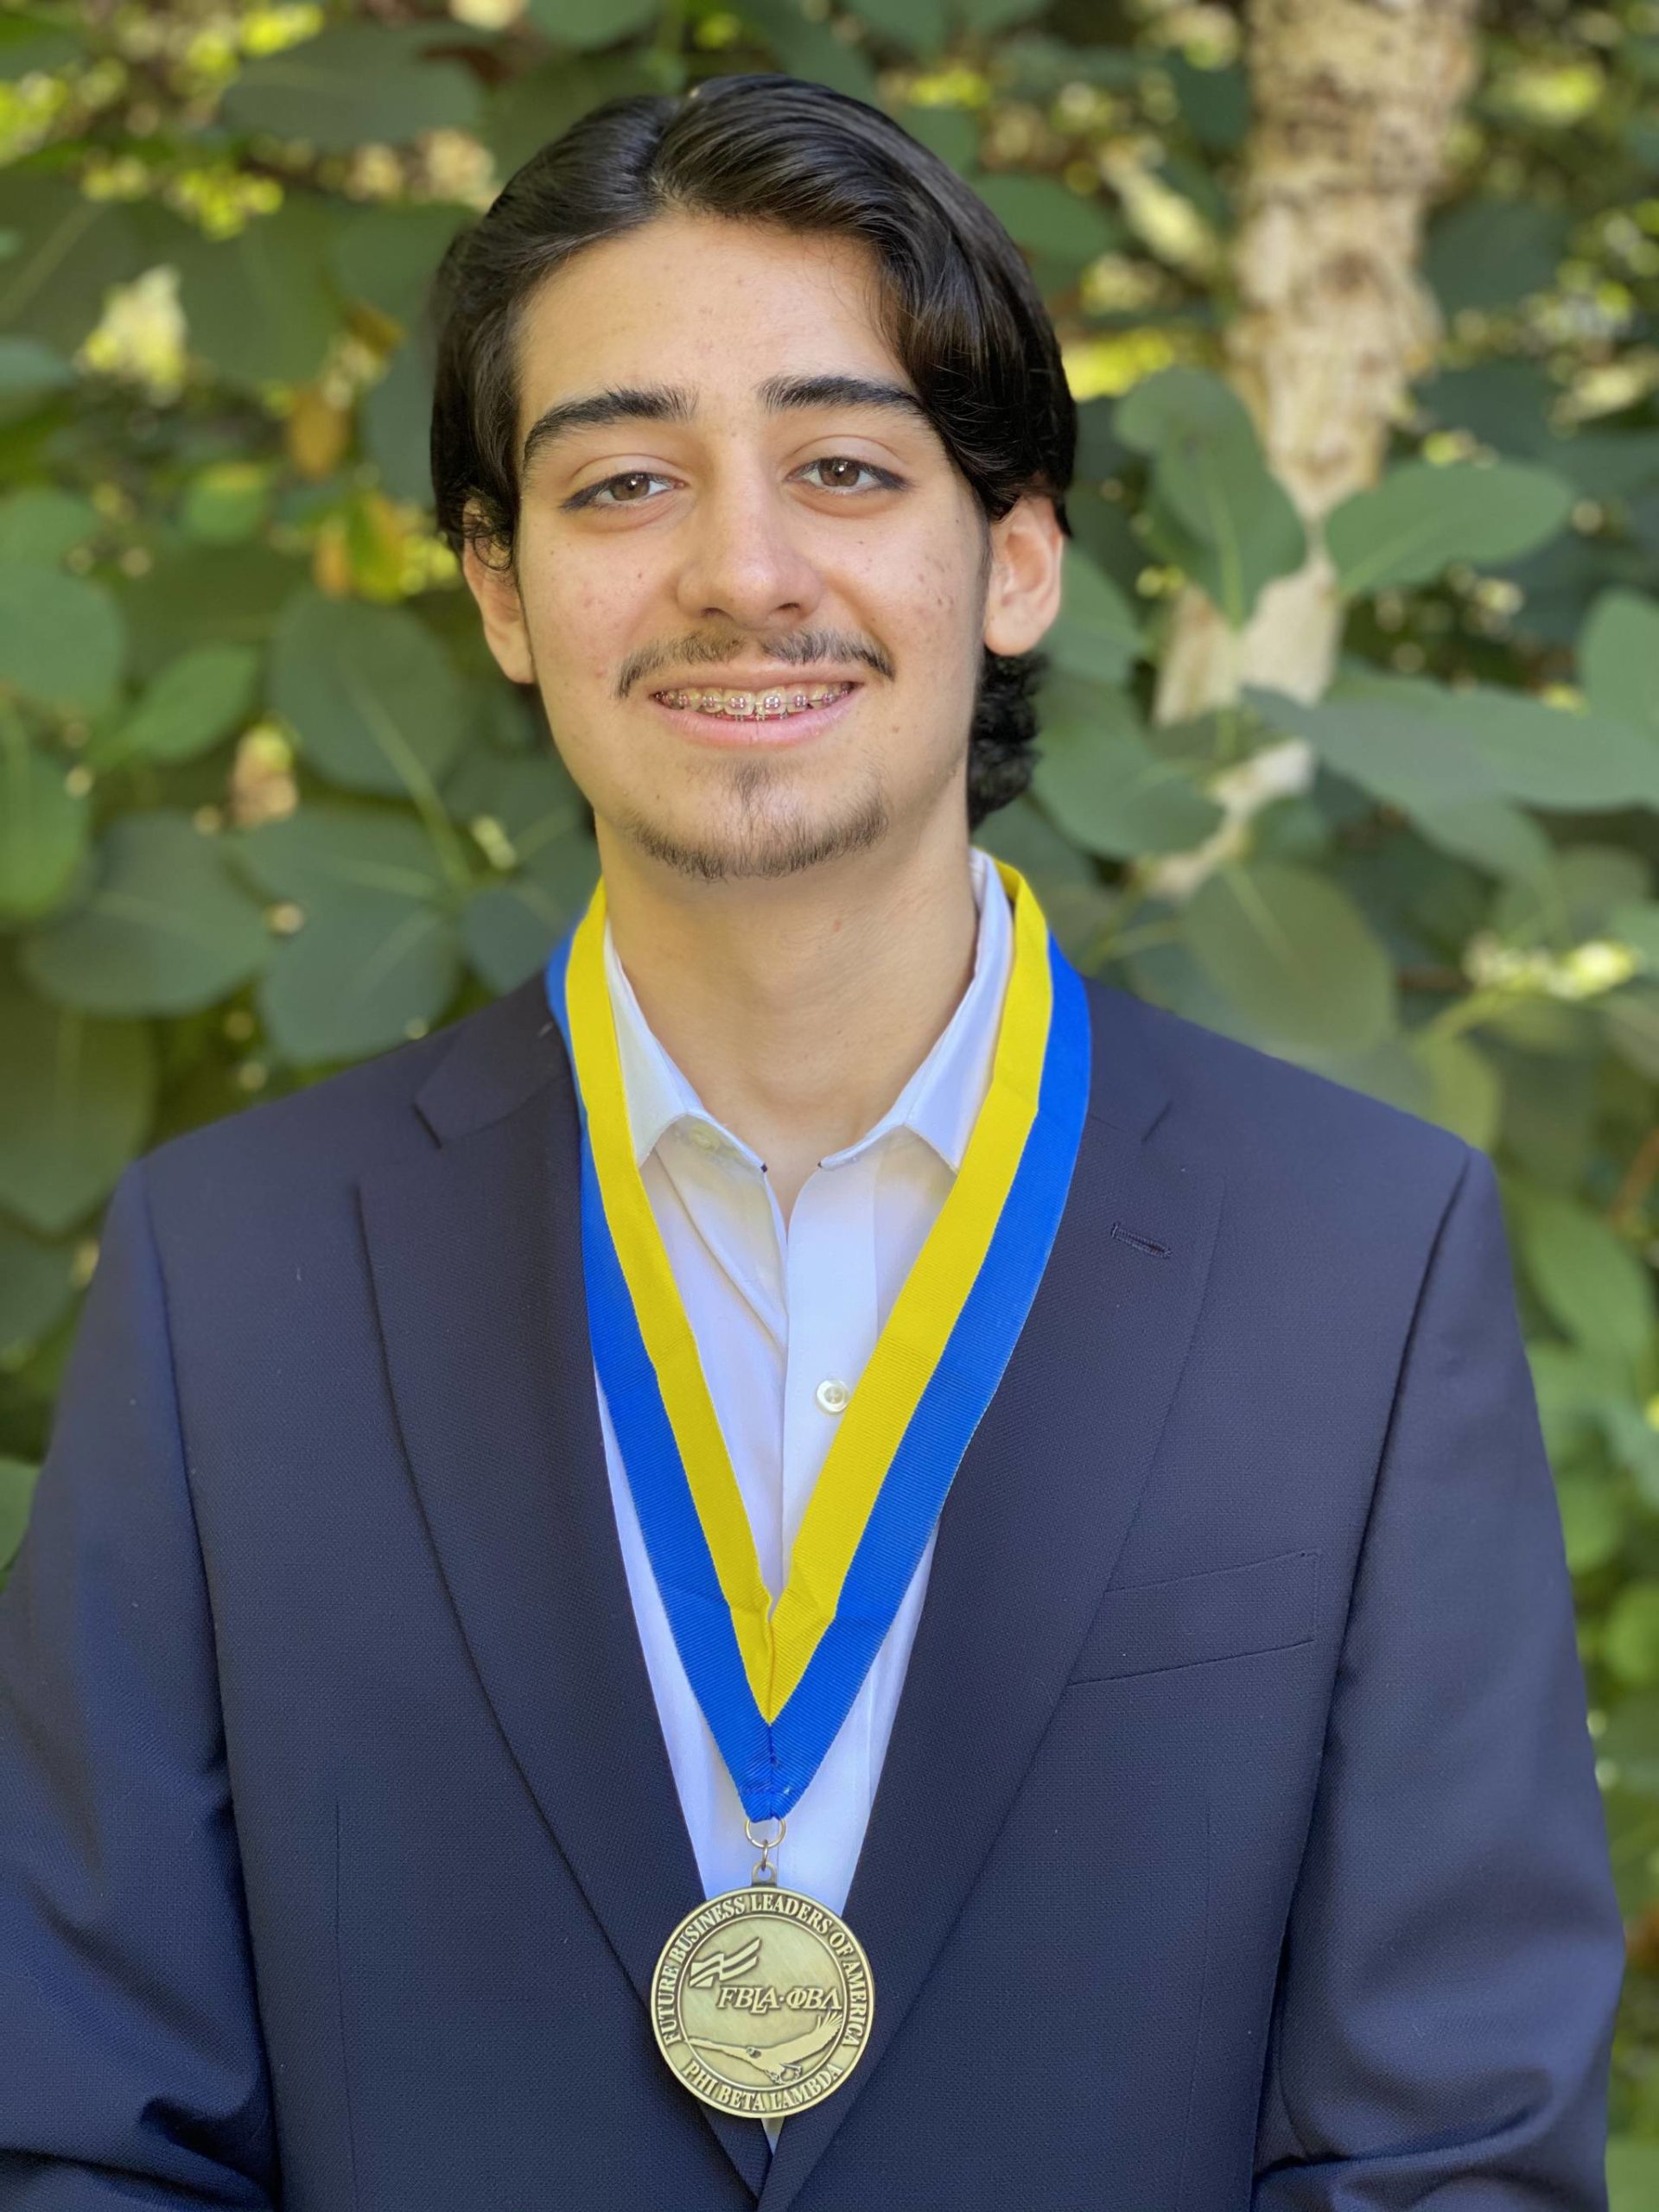 Bainbridge student wins national title in accounting